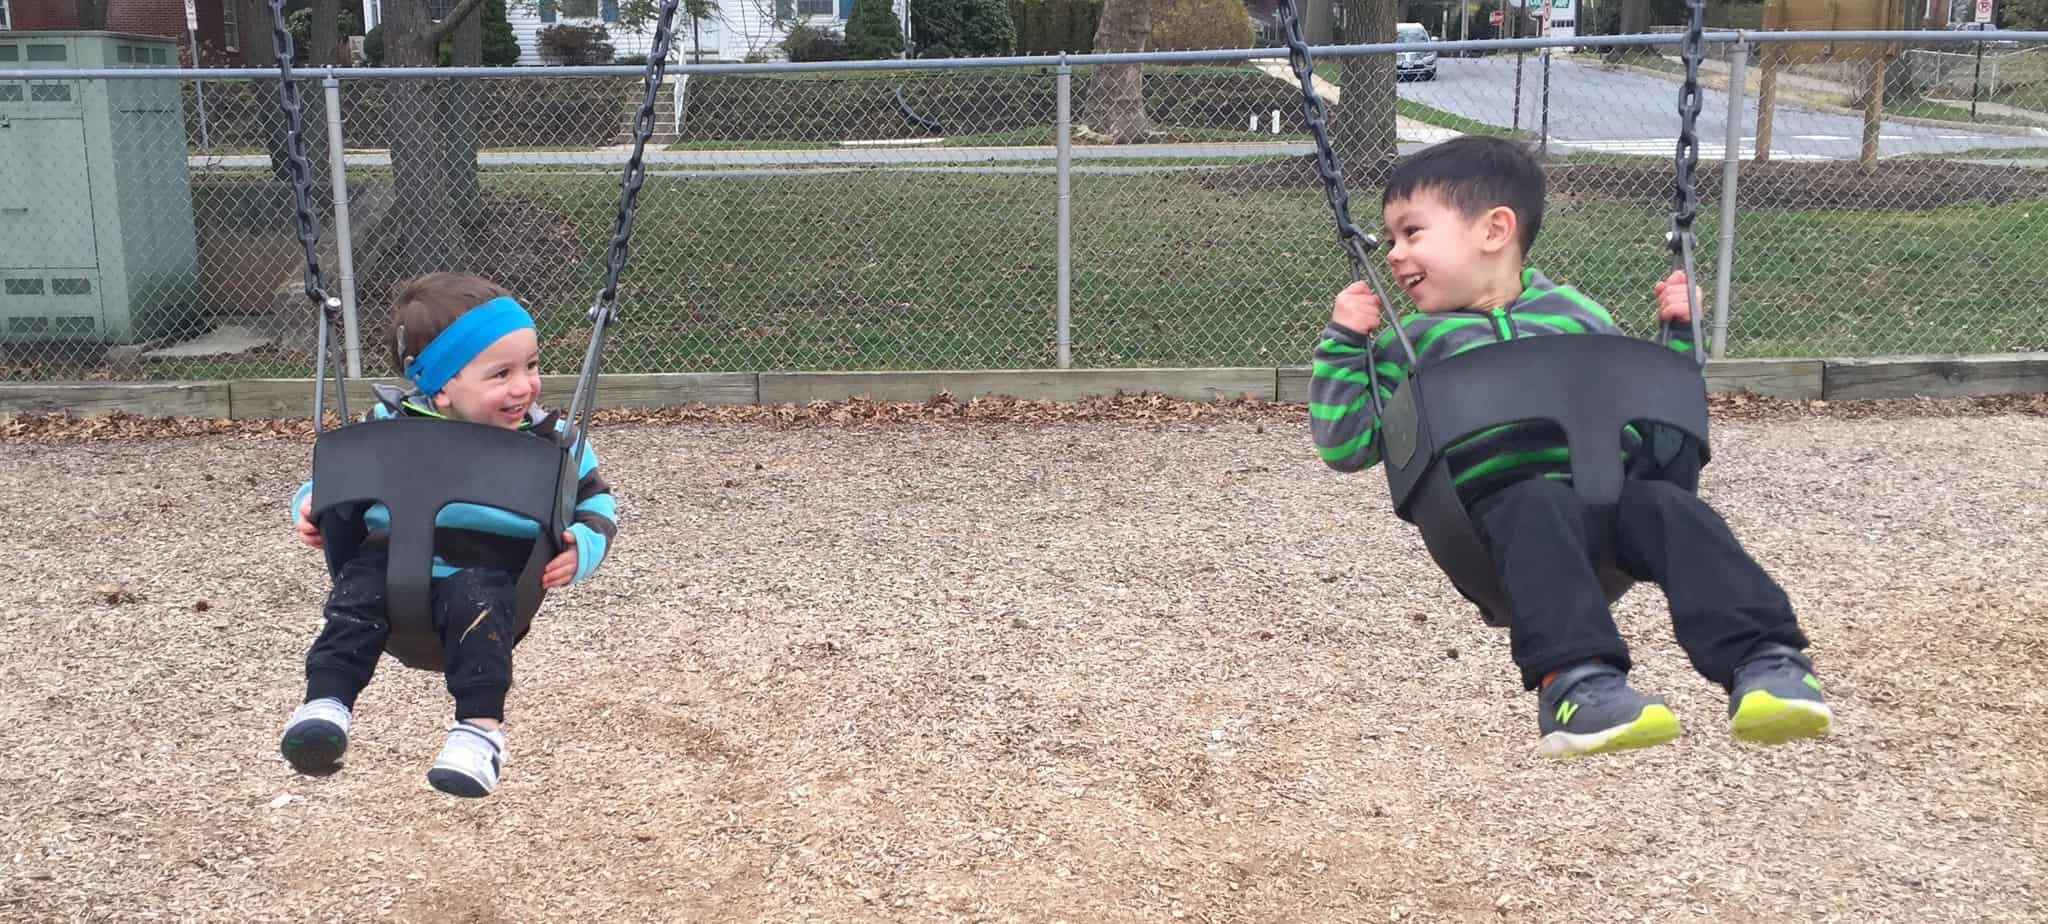 Shane swinging with his brother after being born with hearing loss